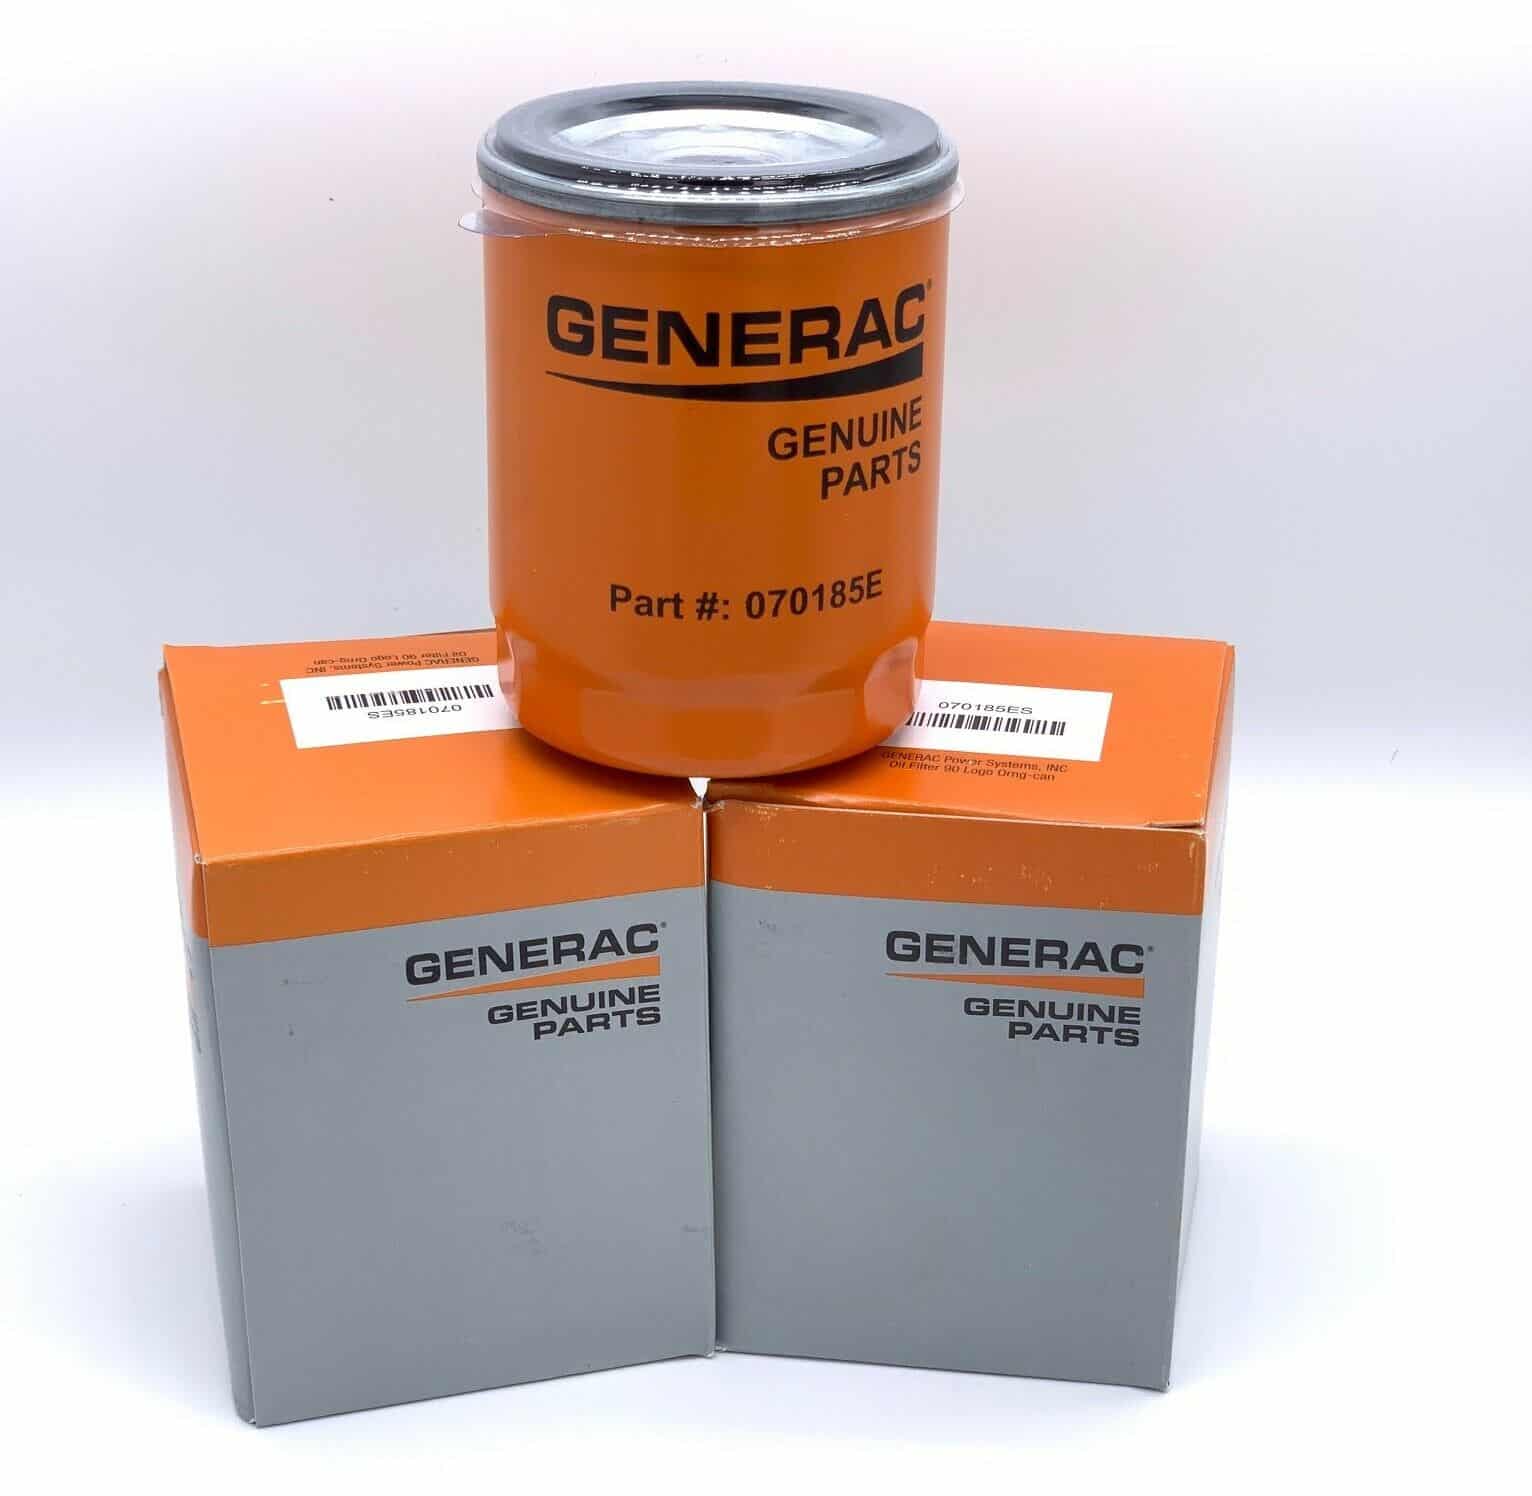 Two boxes of genrac oil filters on a white background.